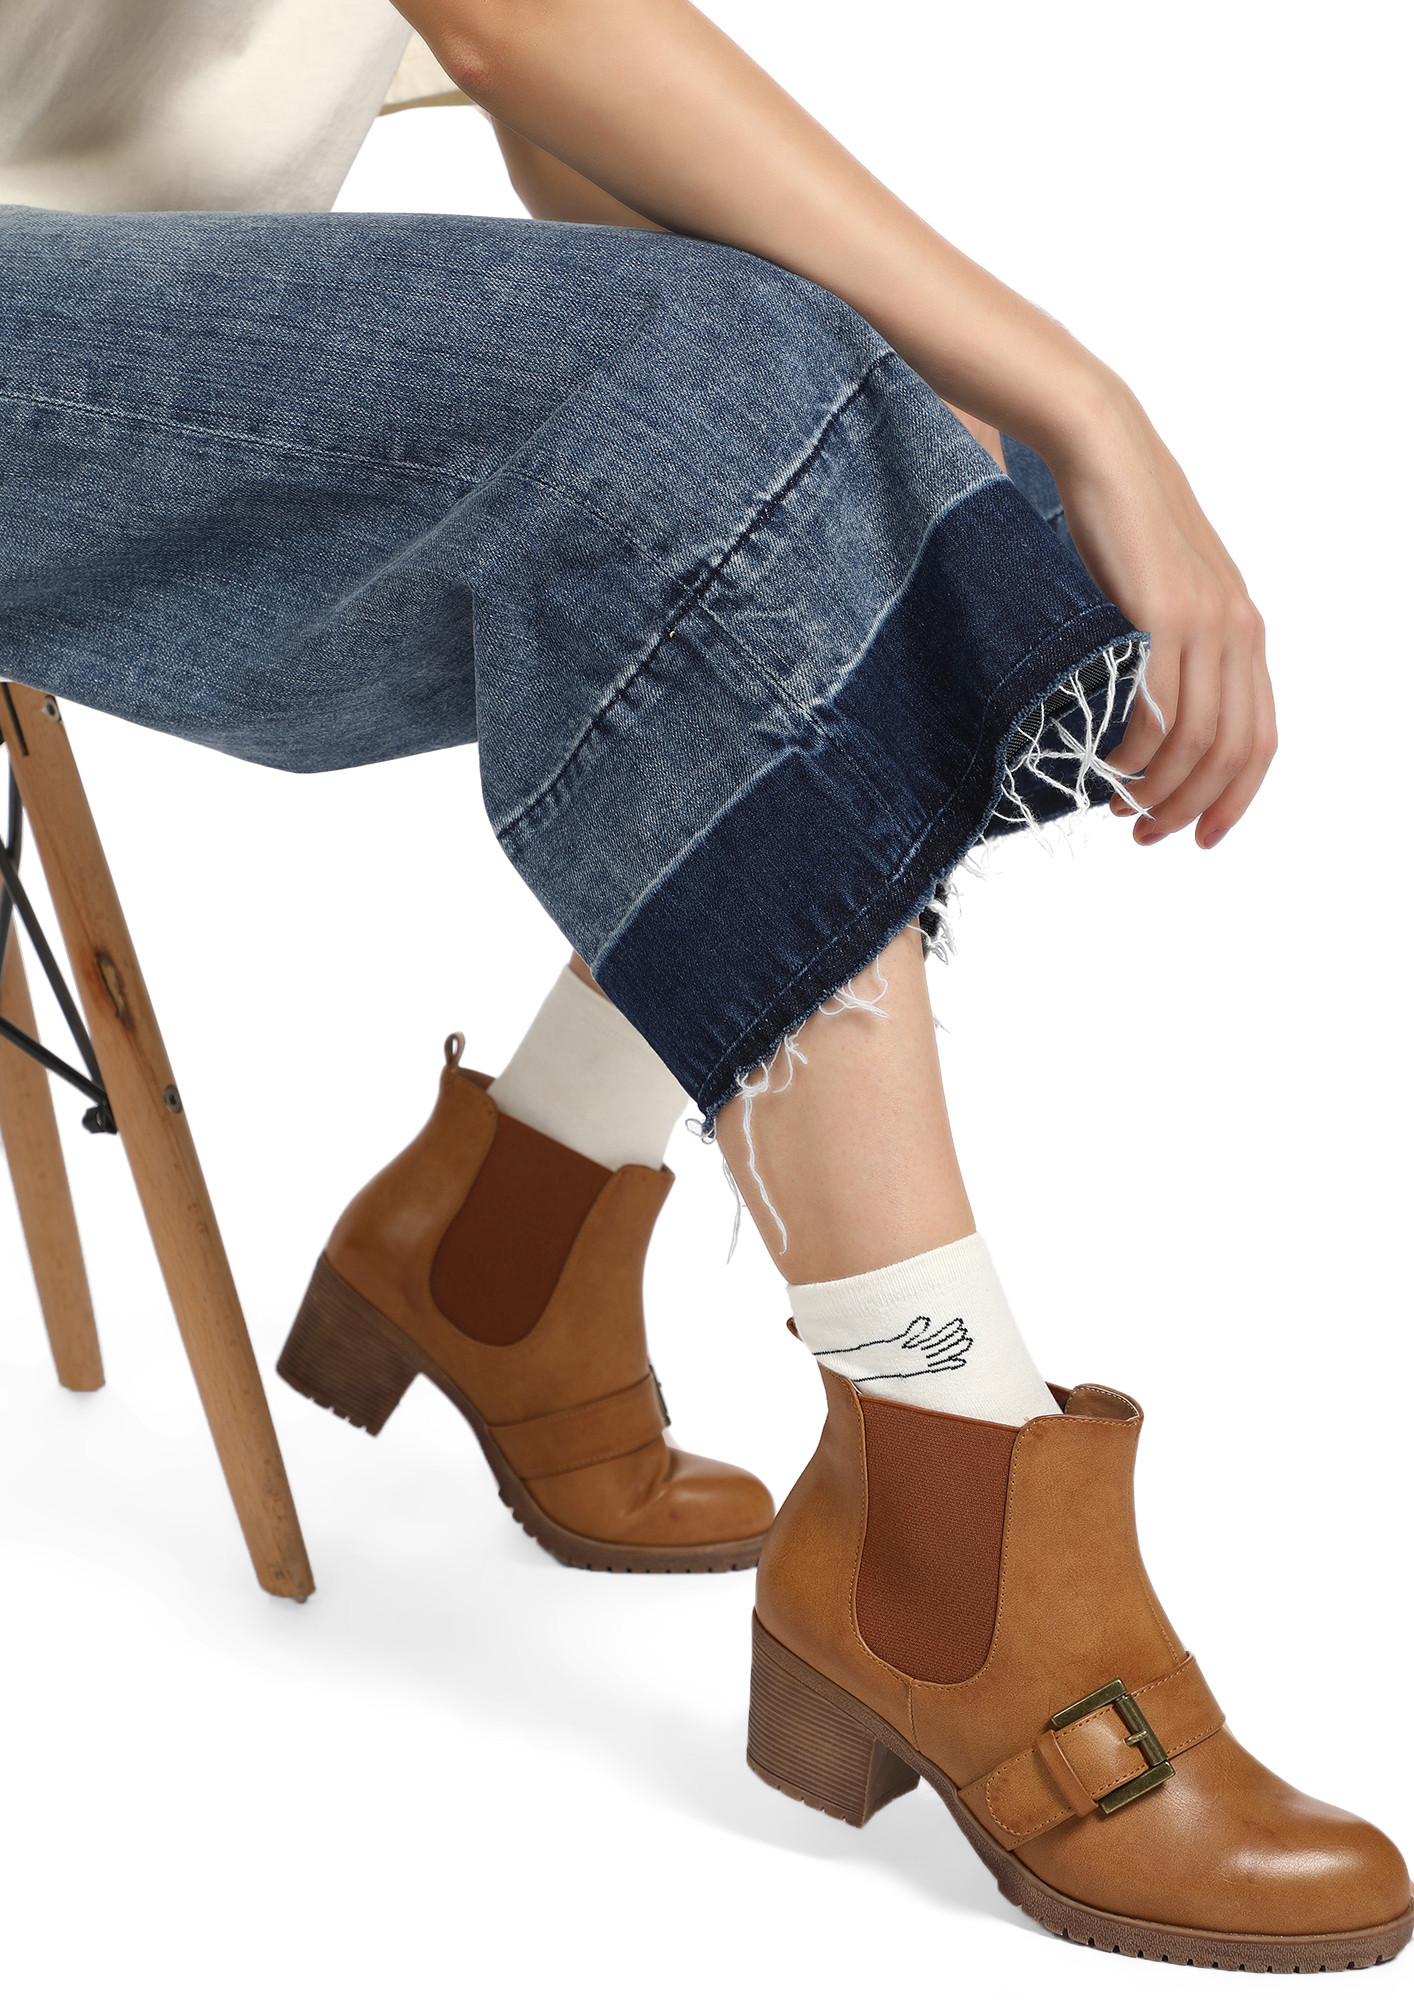 SMARTY AF TAN ANKLE BOOTS